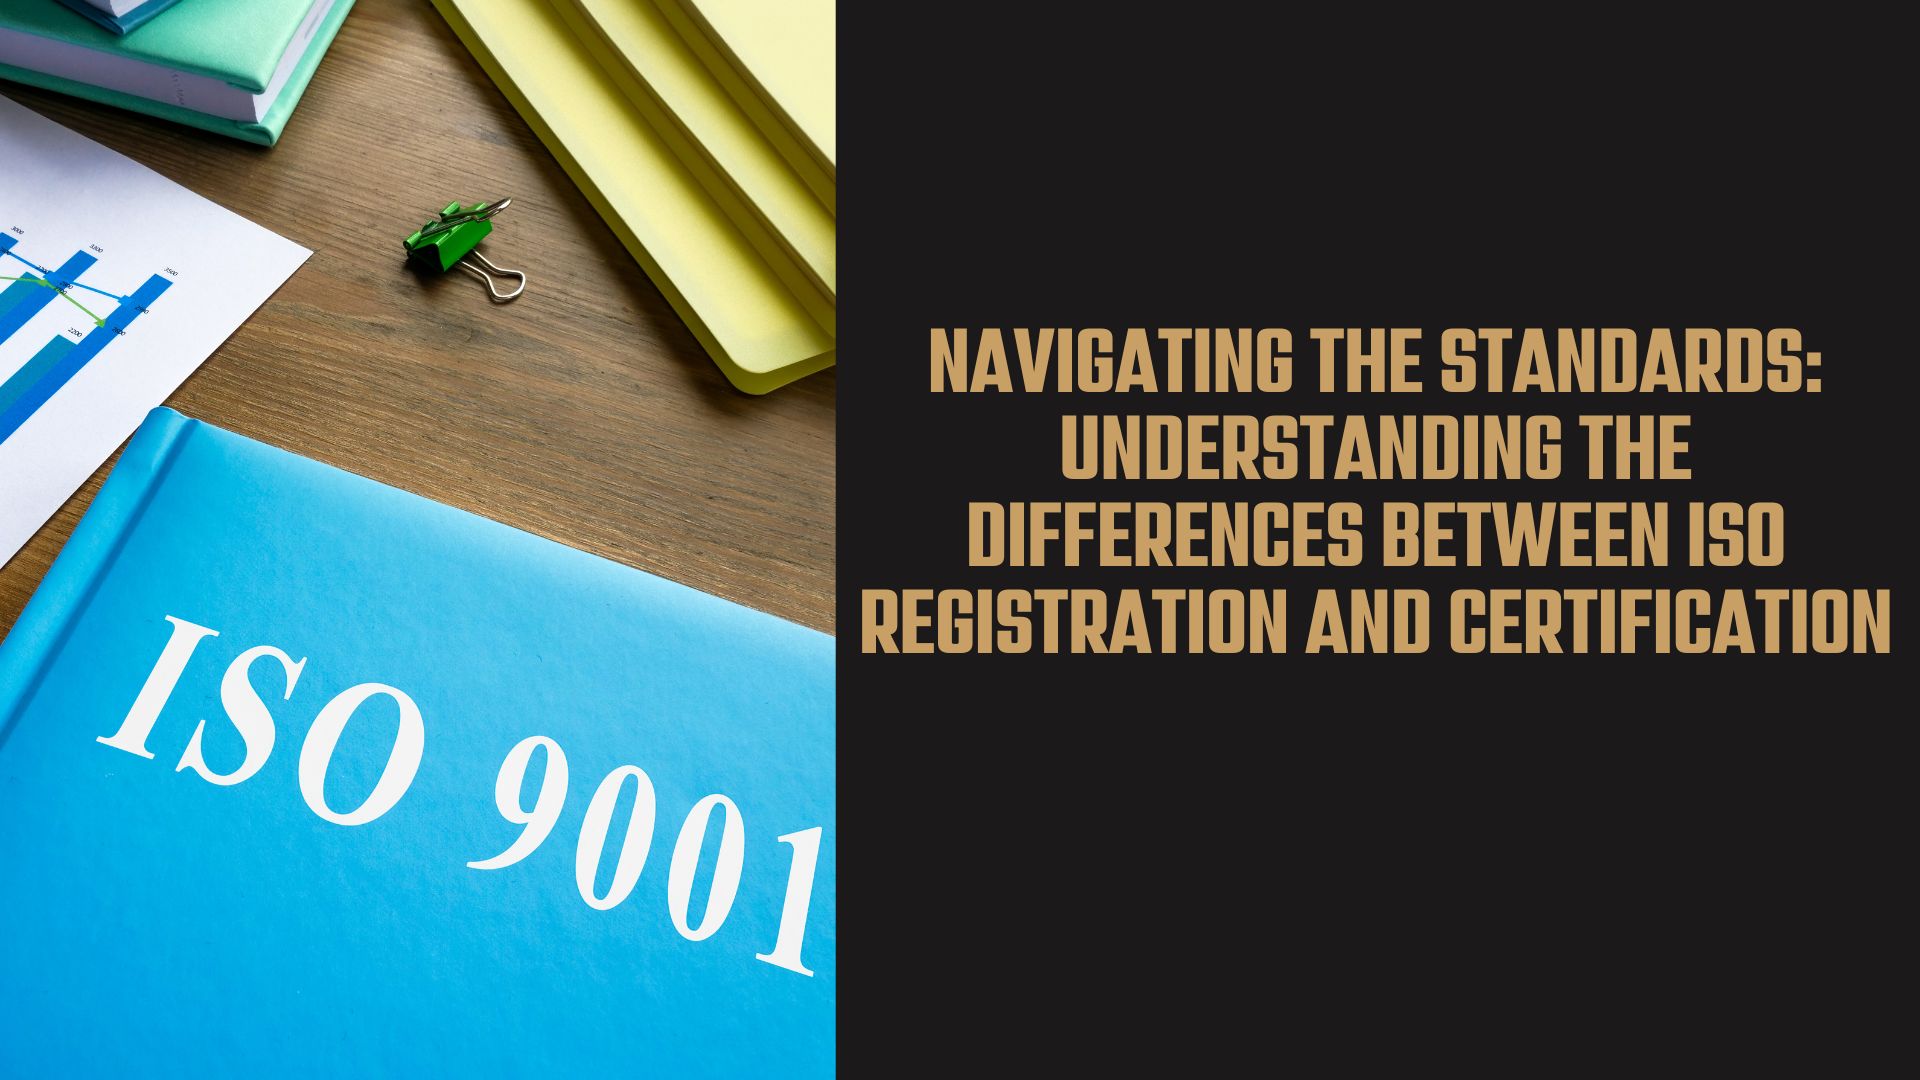 Navigating the Standards: Understanding the Differences Between ISO Registration and Certification